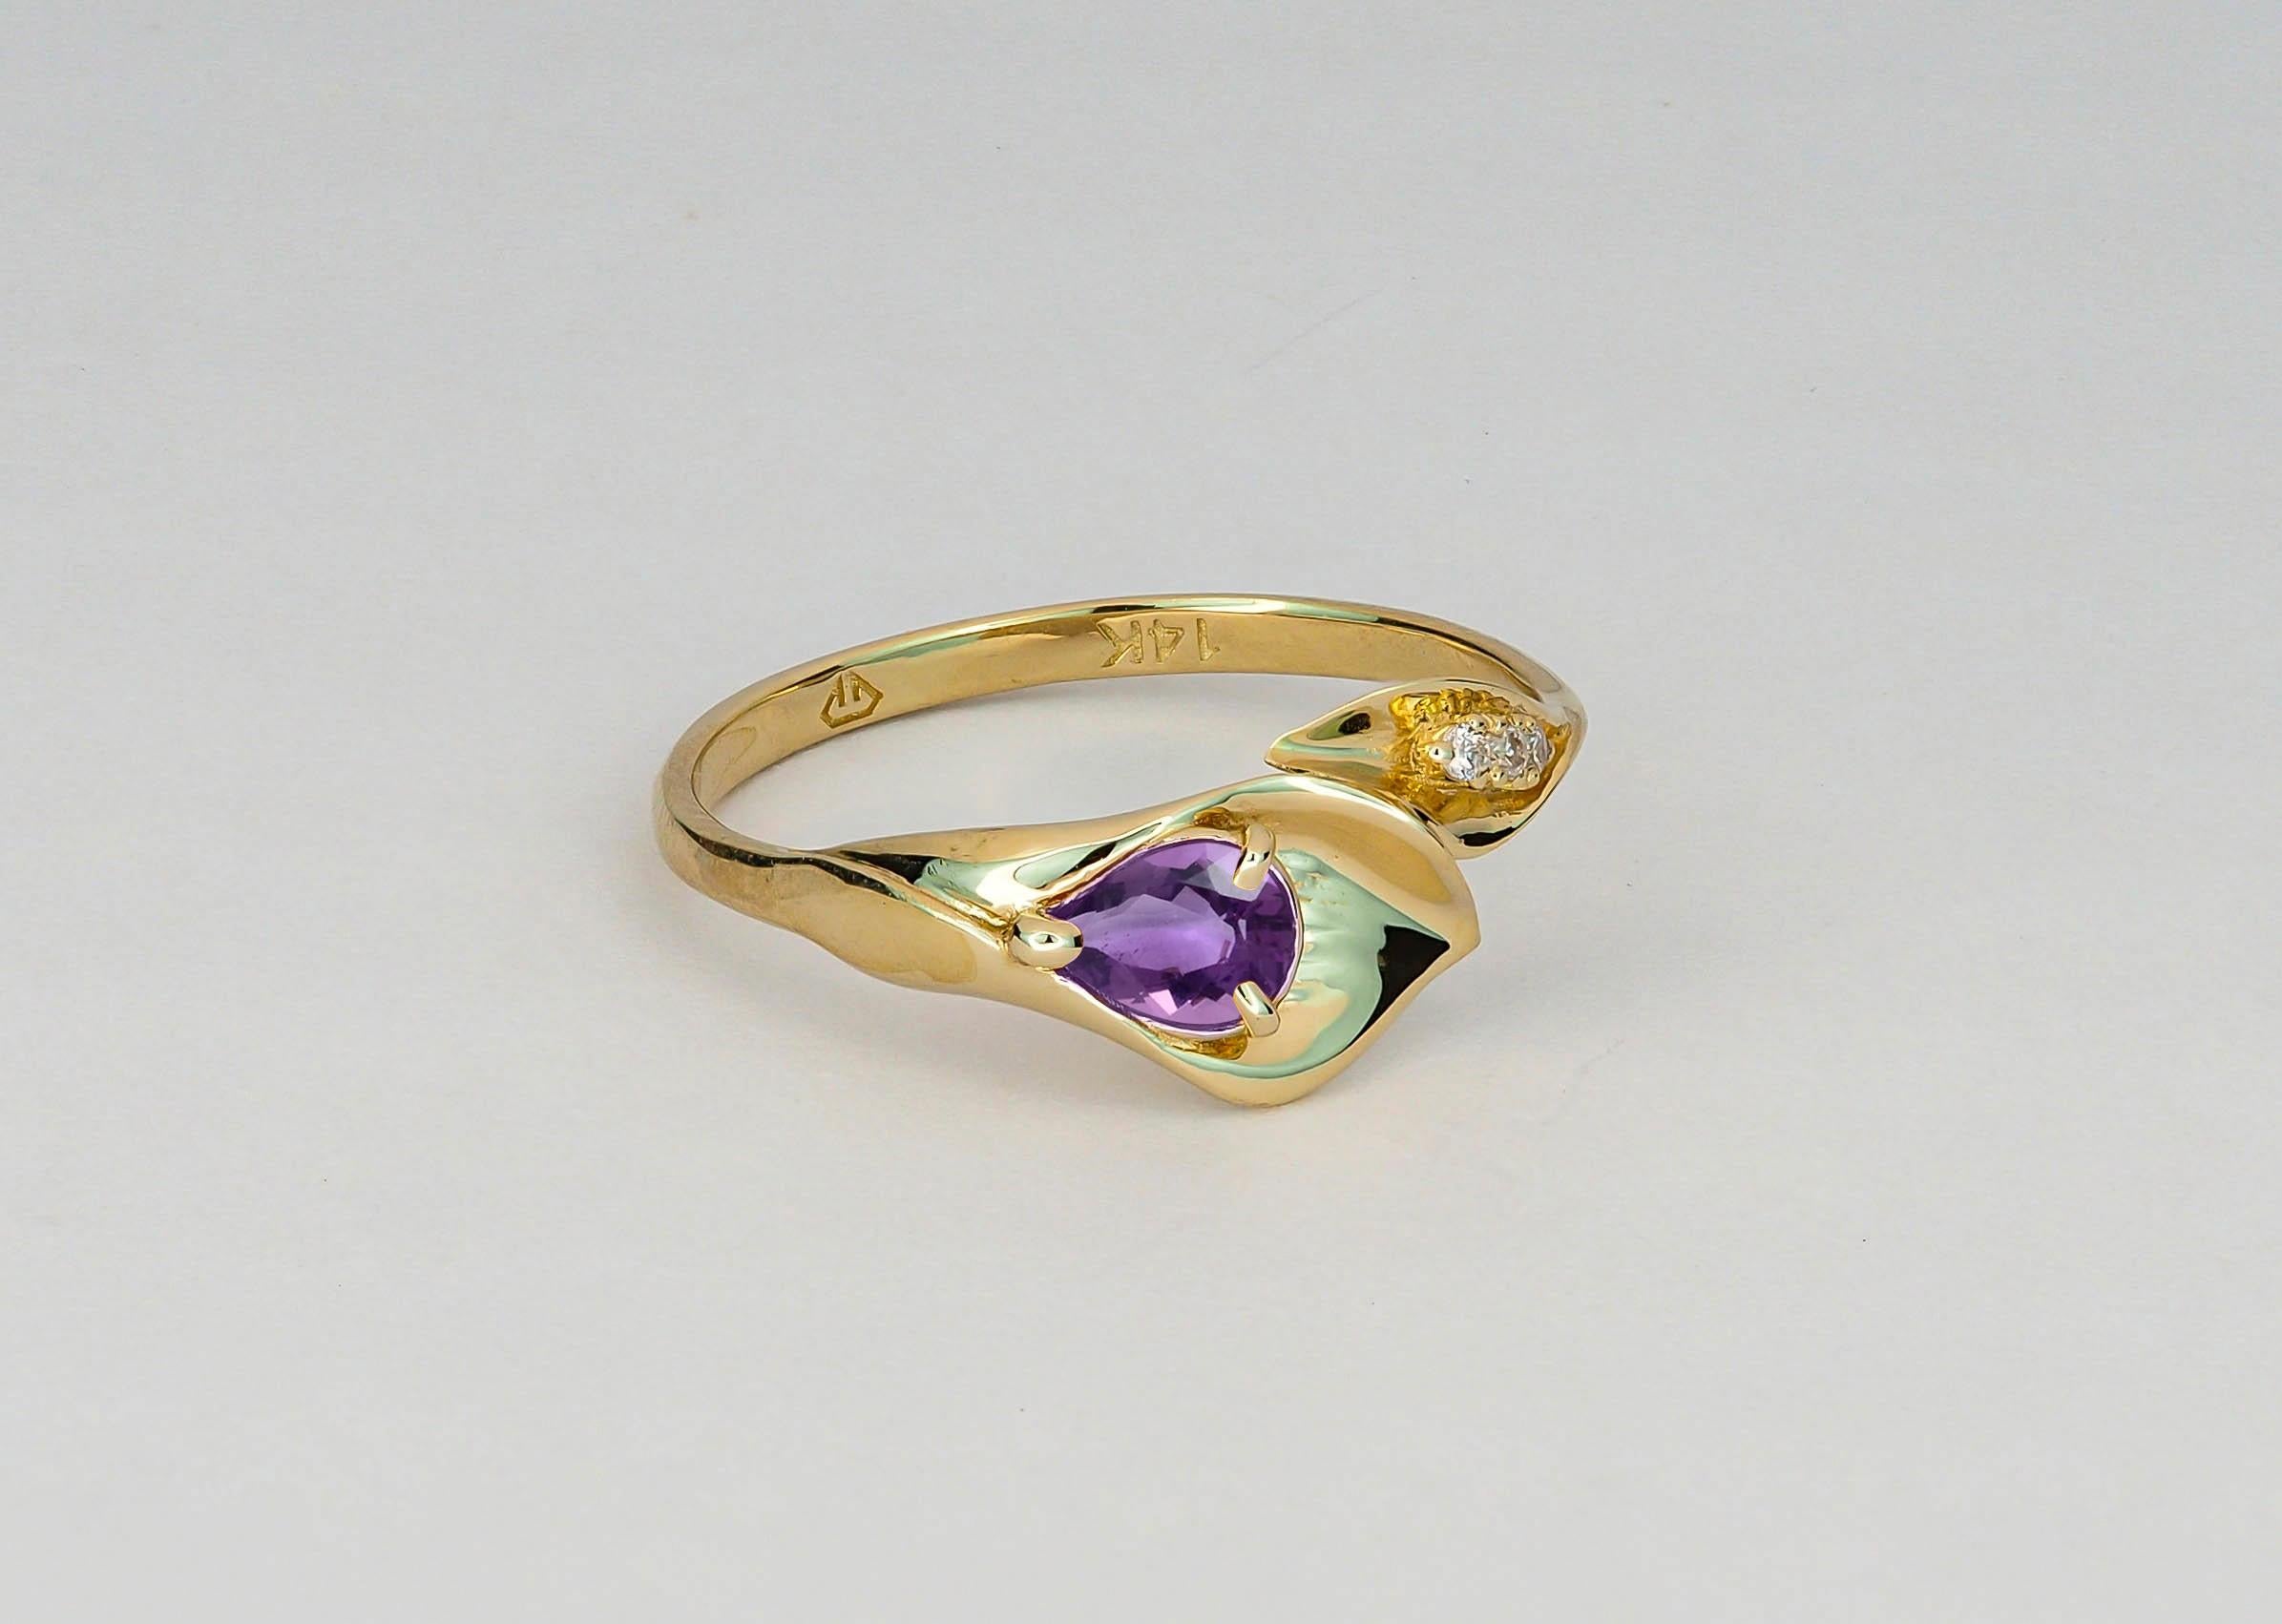 For Sale:  Lily Calla Gold Ring, 14 Karat Gold Ring with Amethyst and Diamonds 2